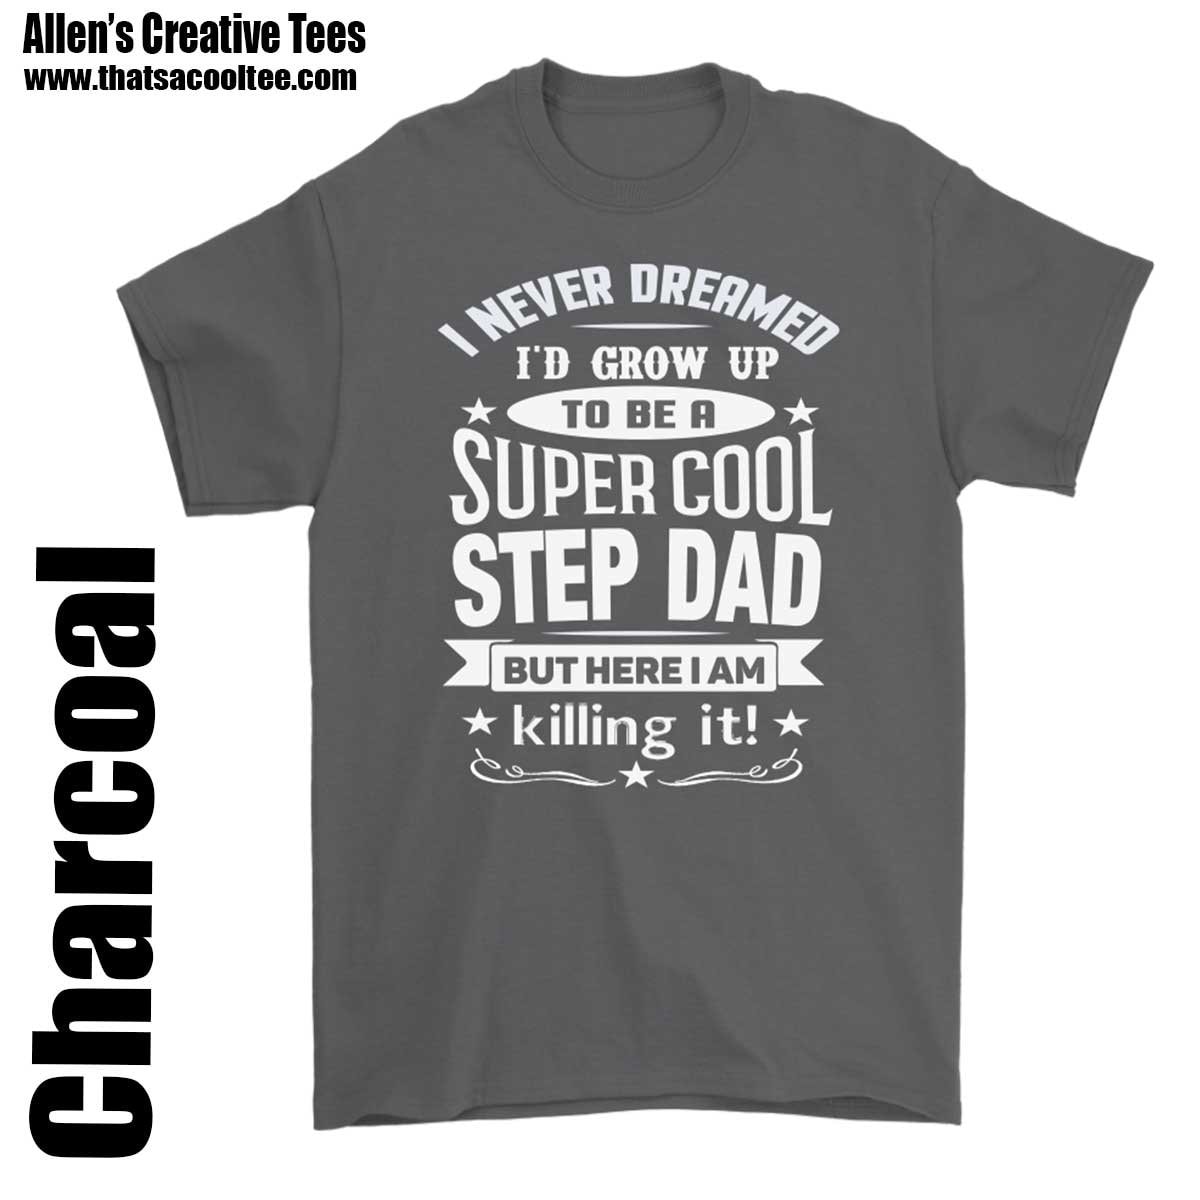 I Never Dreamed I'd Grow up to Be A Super Cool Step Dad - Etsy